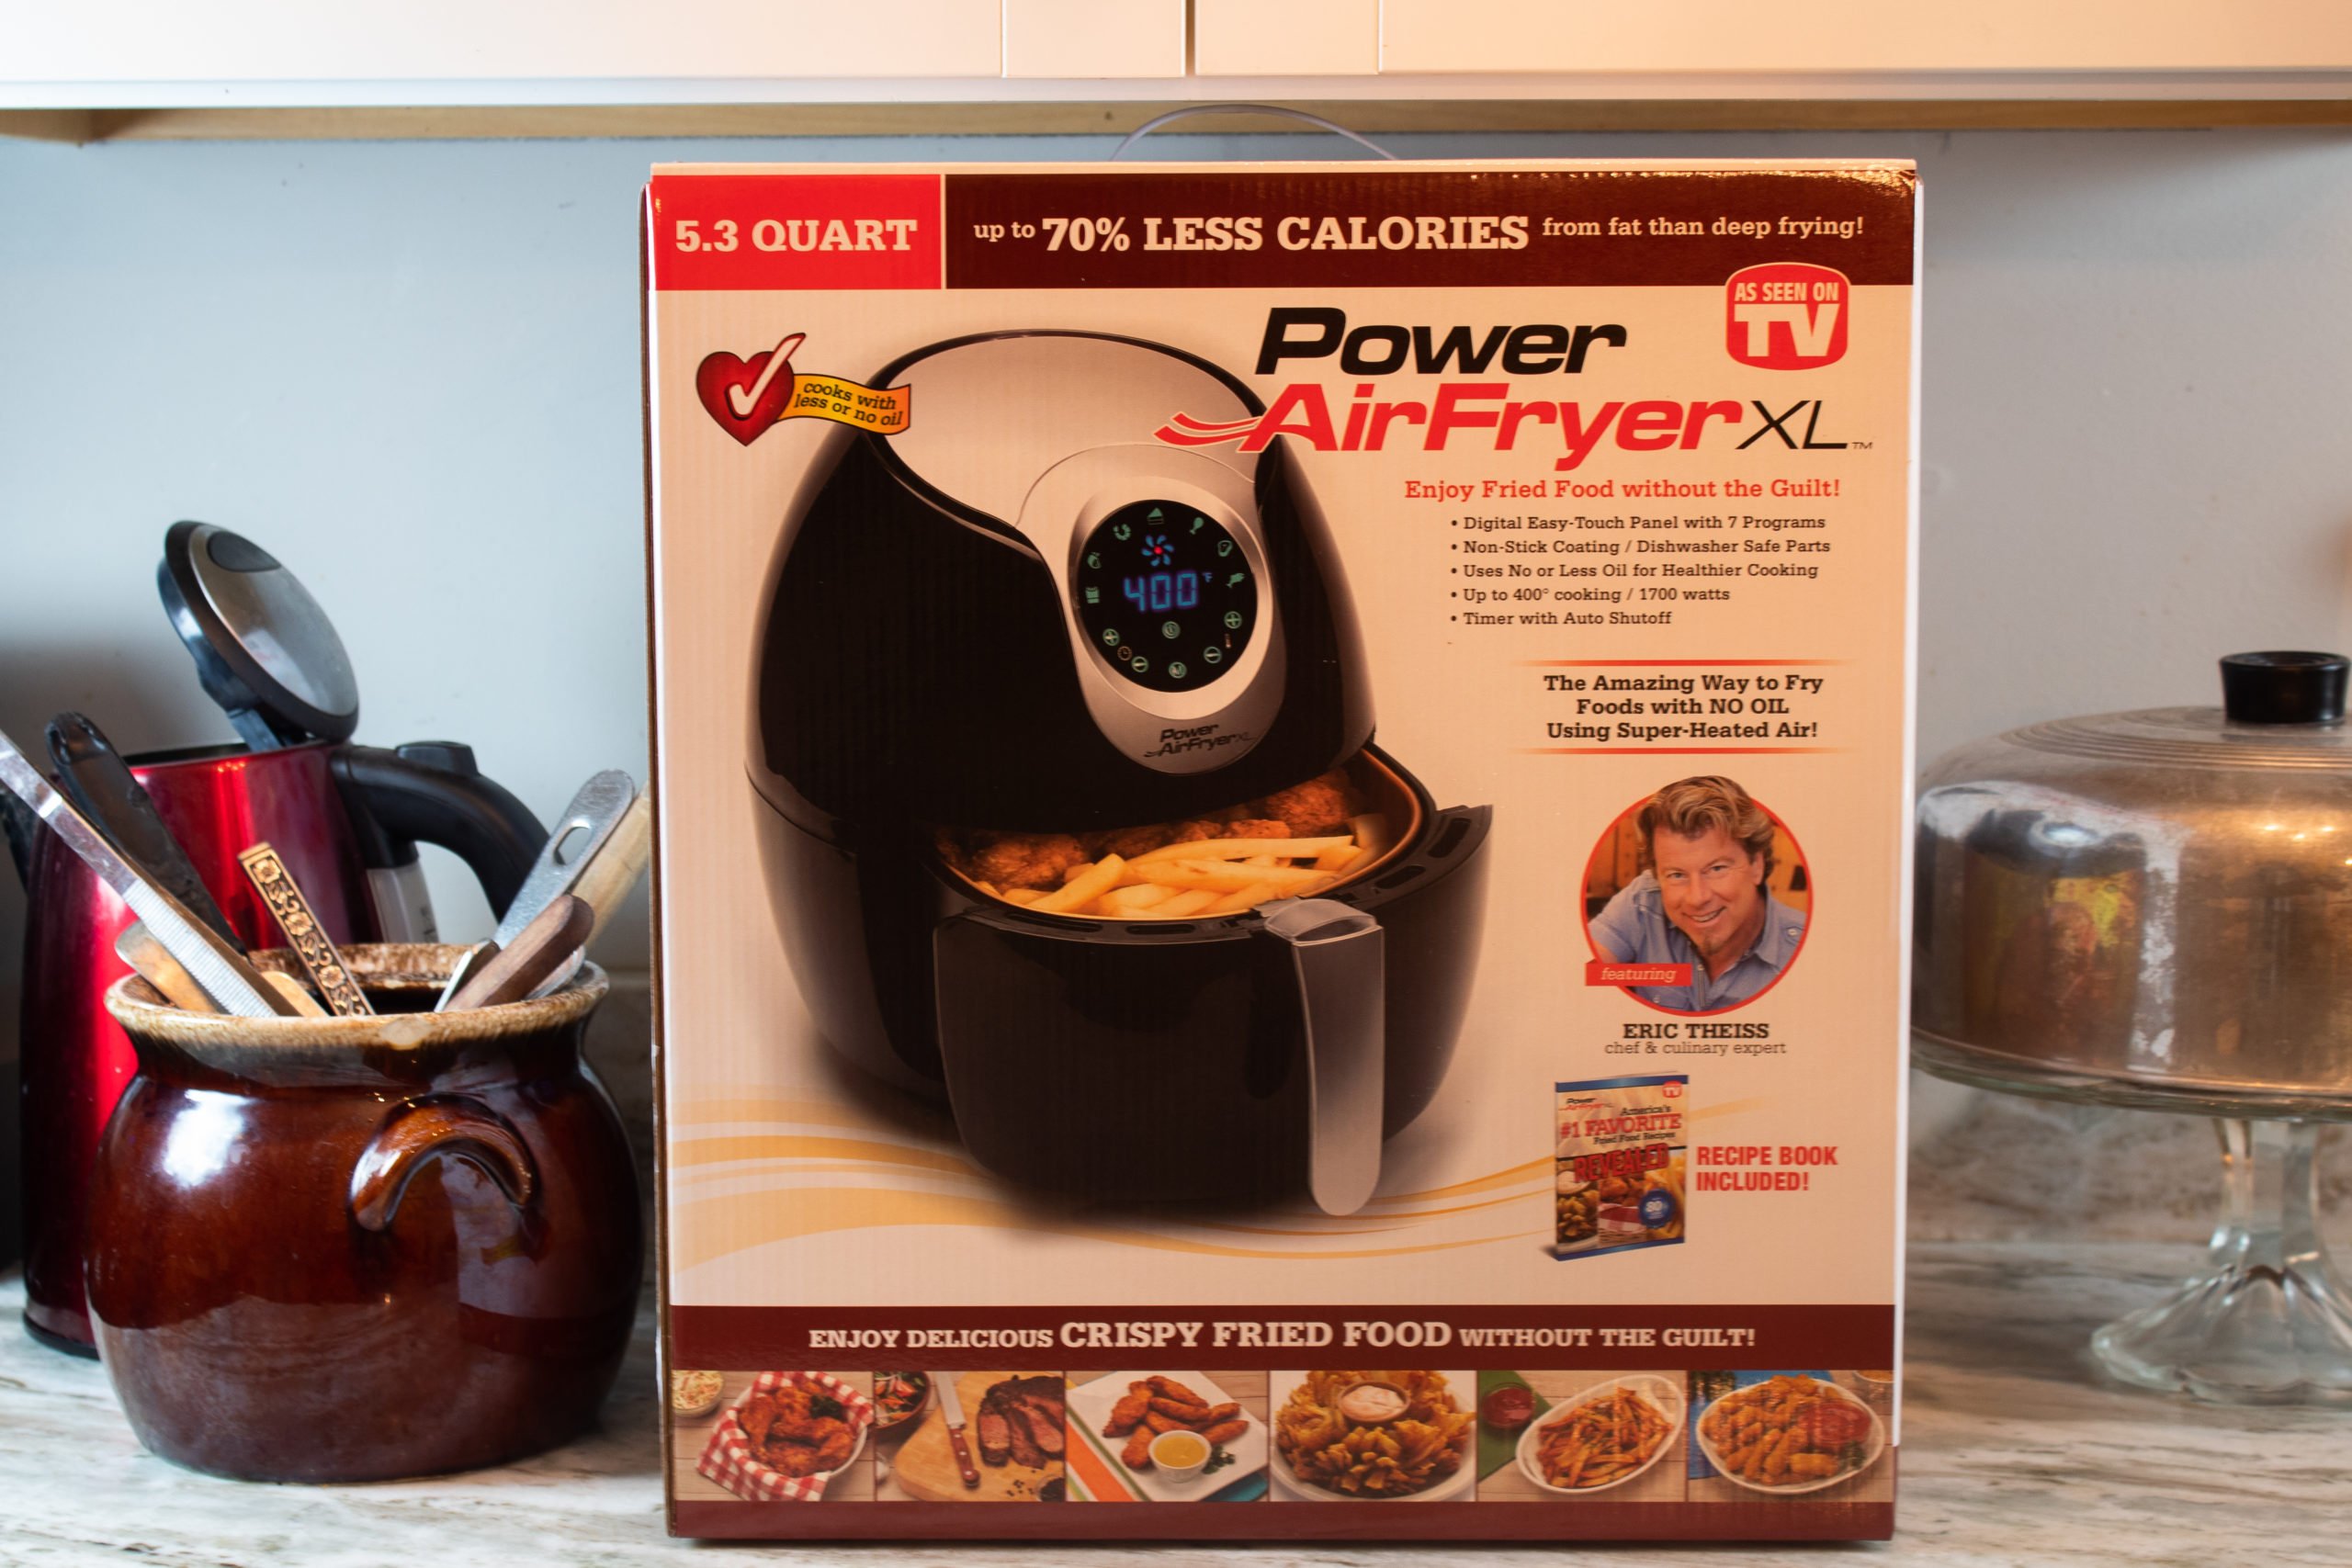 https://tastylicious.com/wp-content/uploads/2018/05/Power-AirFryer-XL-Box-scaled.jpg